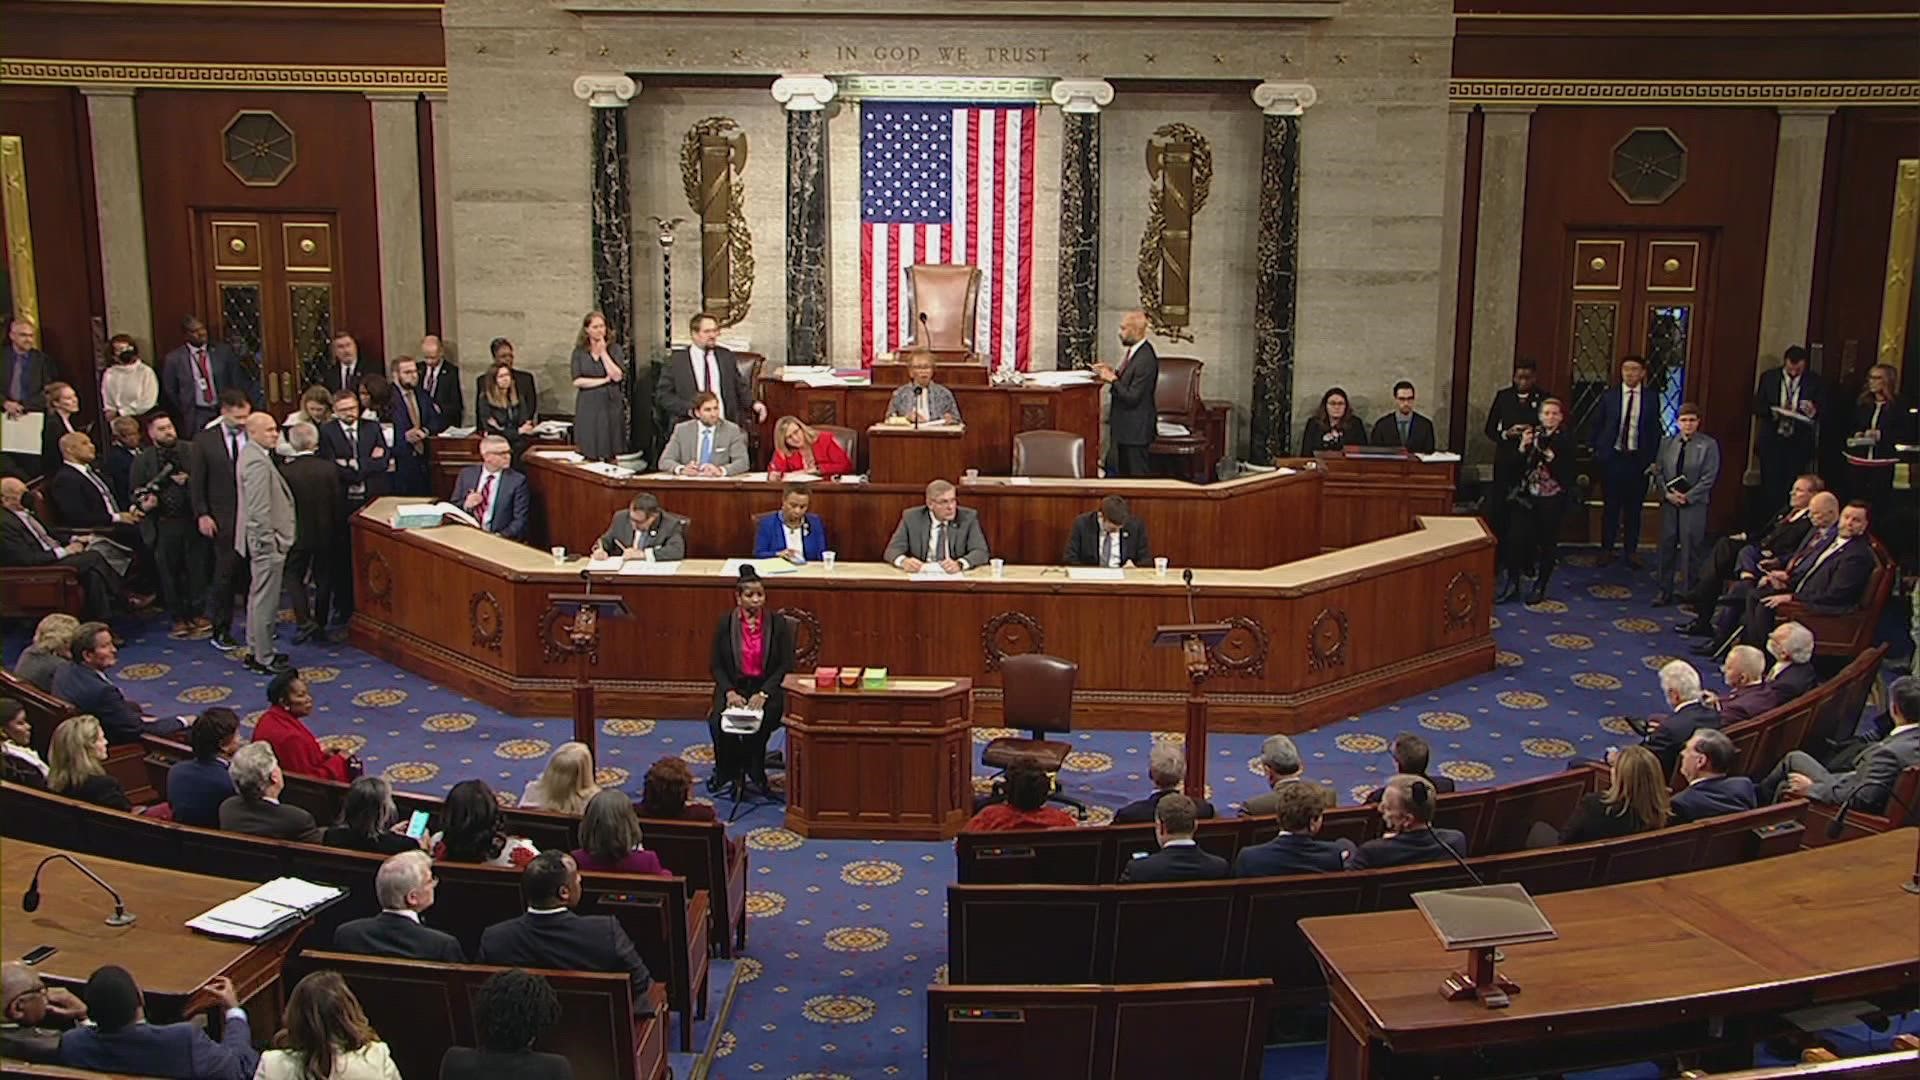 The House has adjourned until noon Thursday with still no speaker elected.